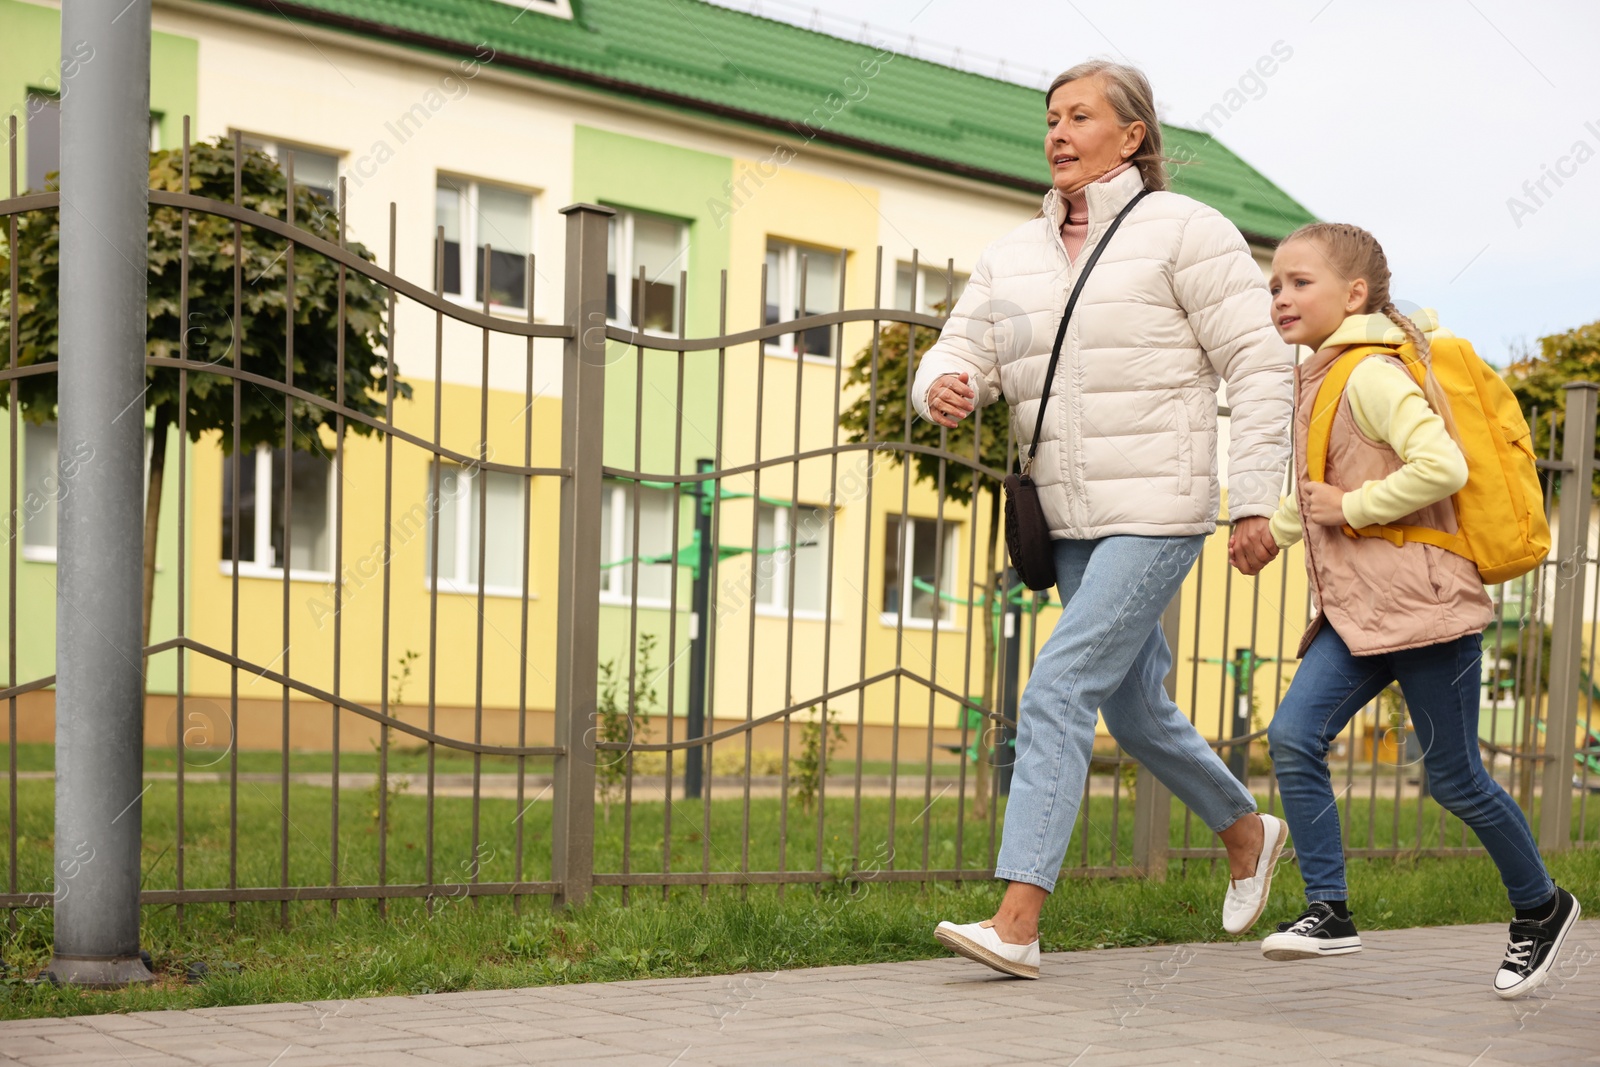 Photo of Being late for school. Senior woman and her granddaughter with backpack running outdoors, low angle view